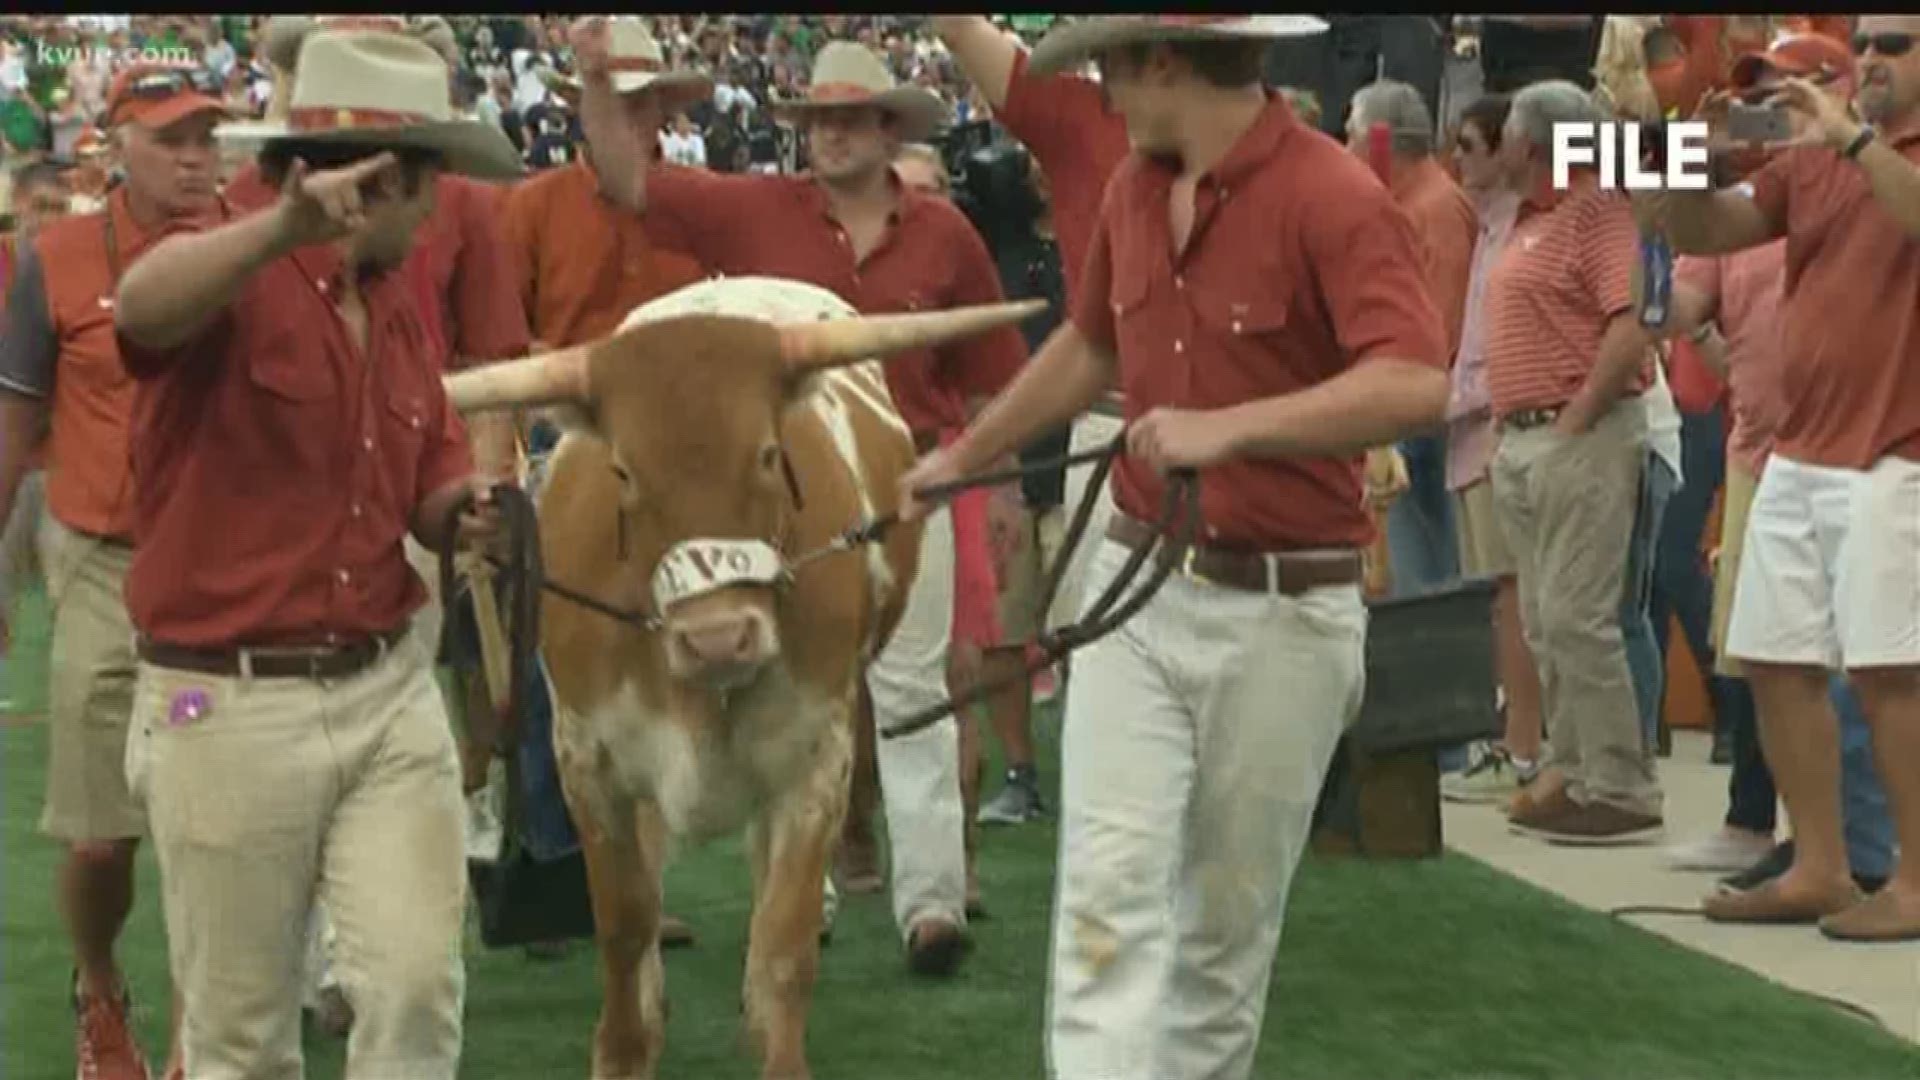 The University of Texas celebrated the birthday of its beloved mascot, Bevo.